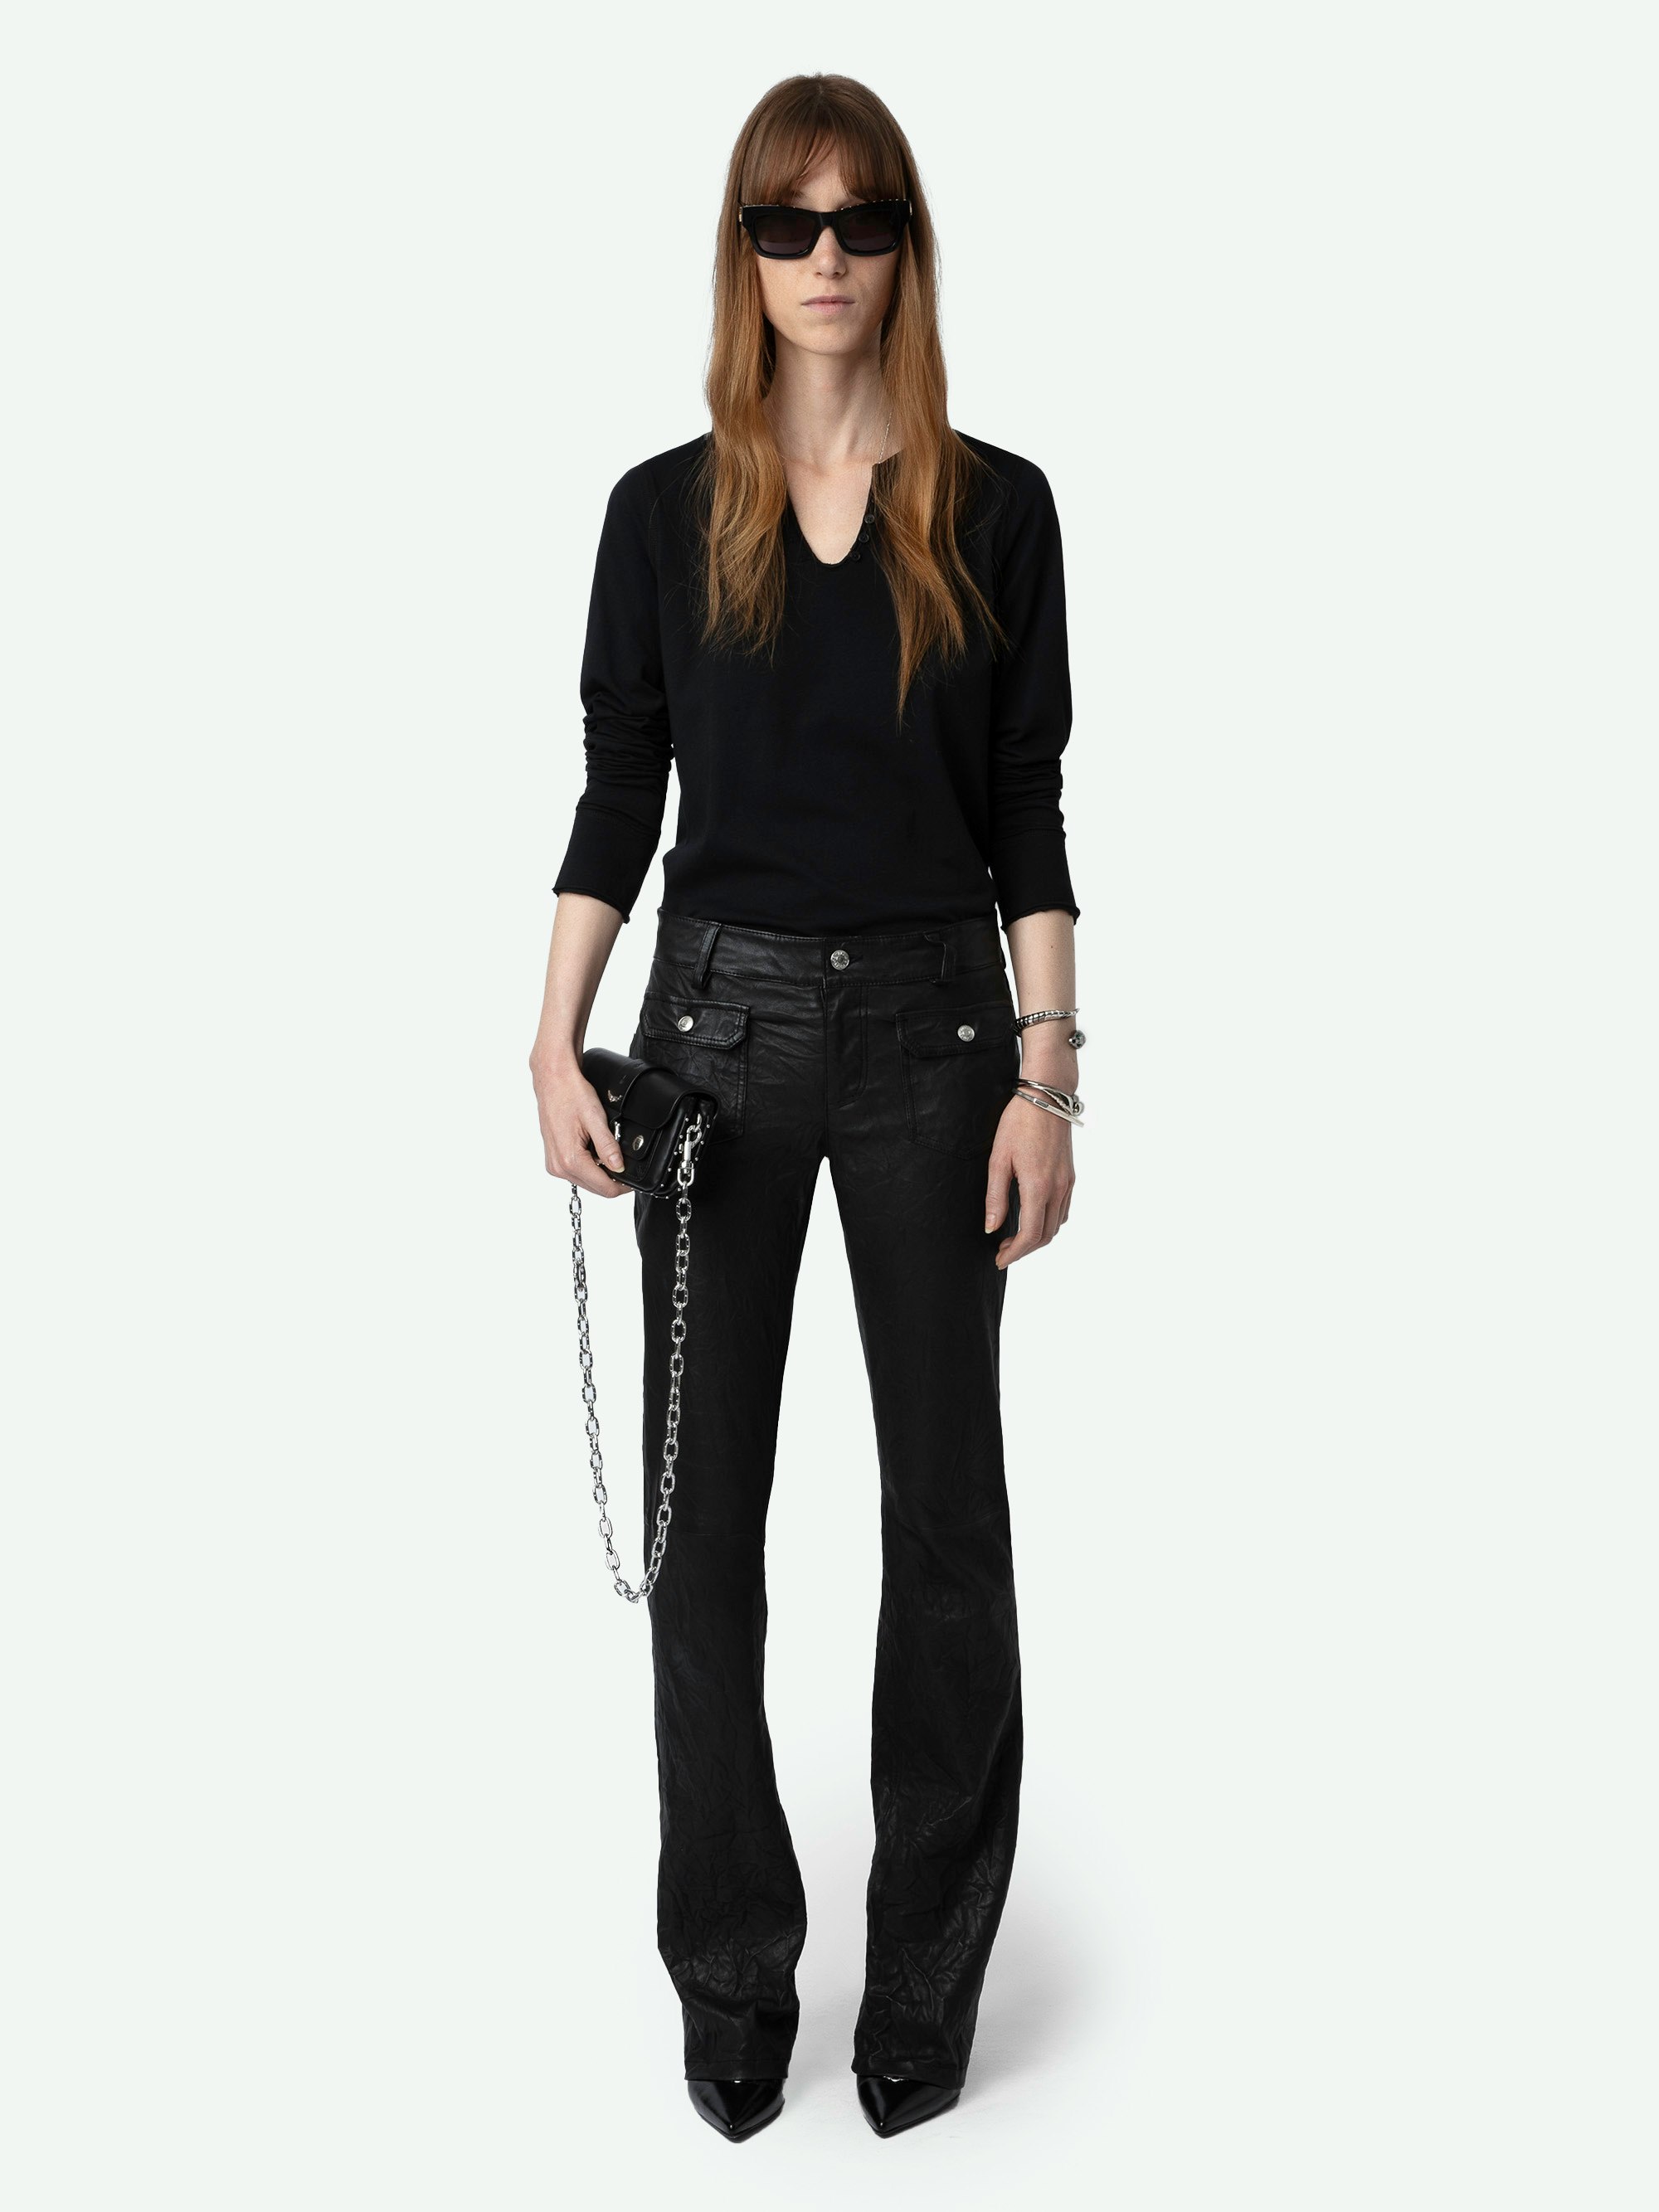 Hippie Crinkled Leather Trousers - Women's black creased leather trousers